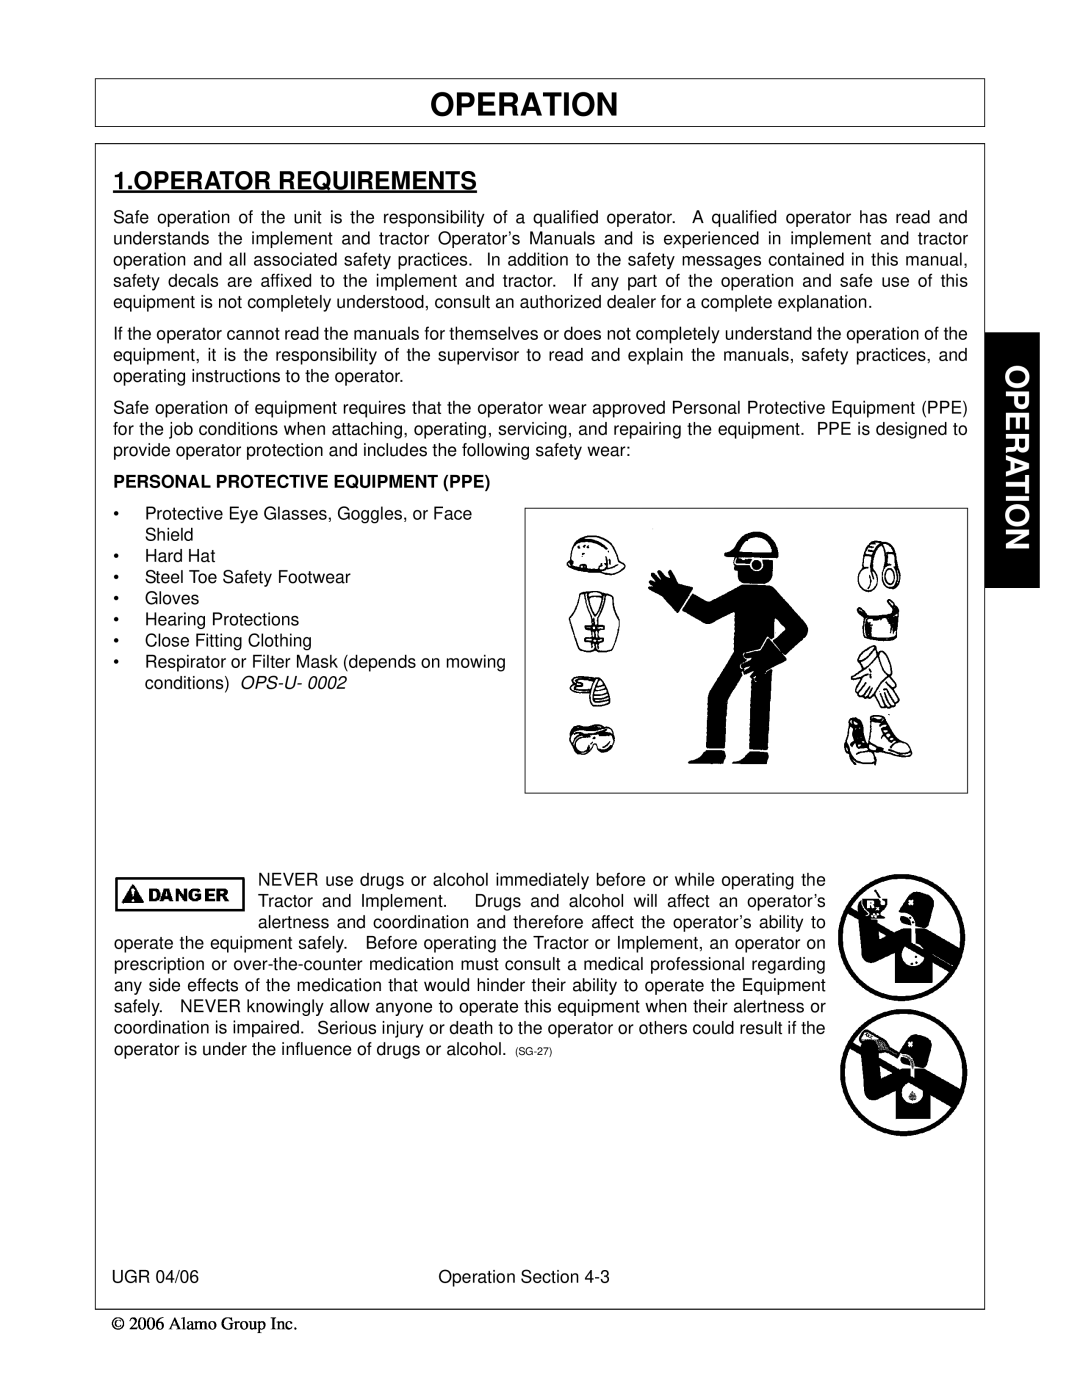 Alamo 02979718C manual Operation, Operator Requirements, Personal Protective Equipment Ppe 